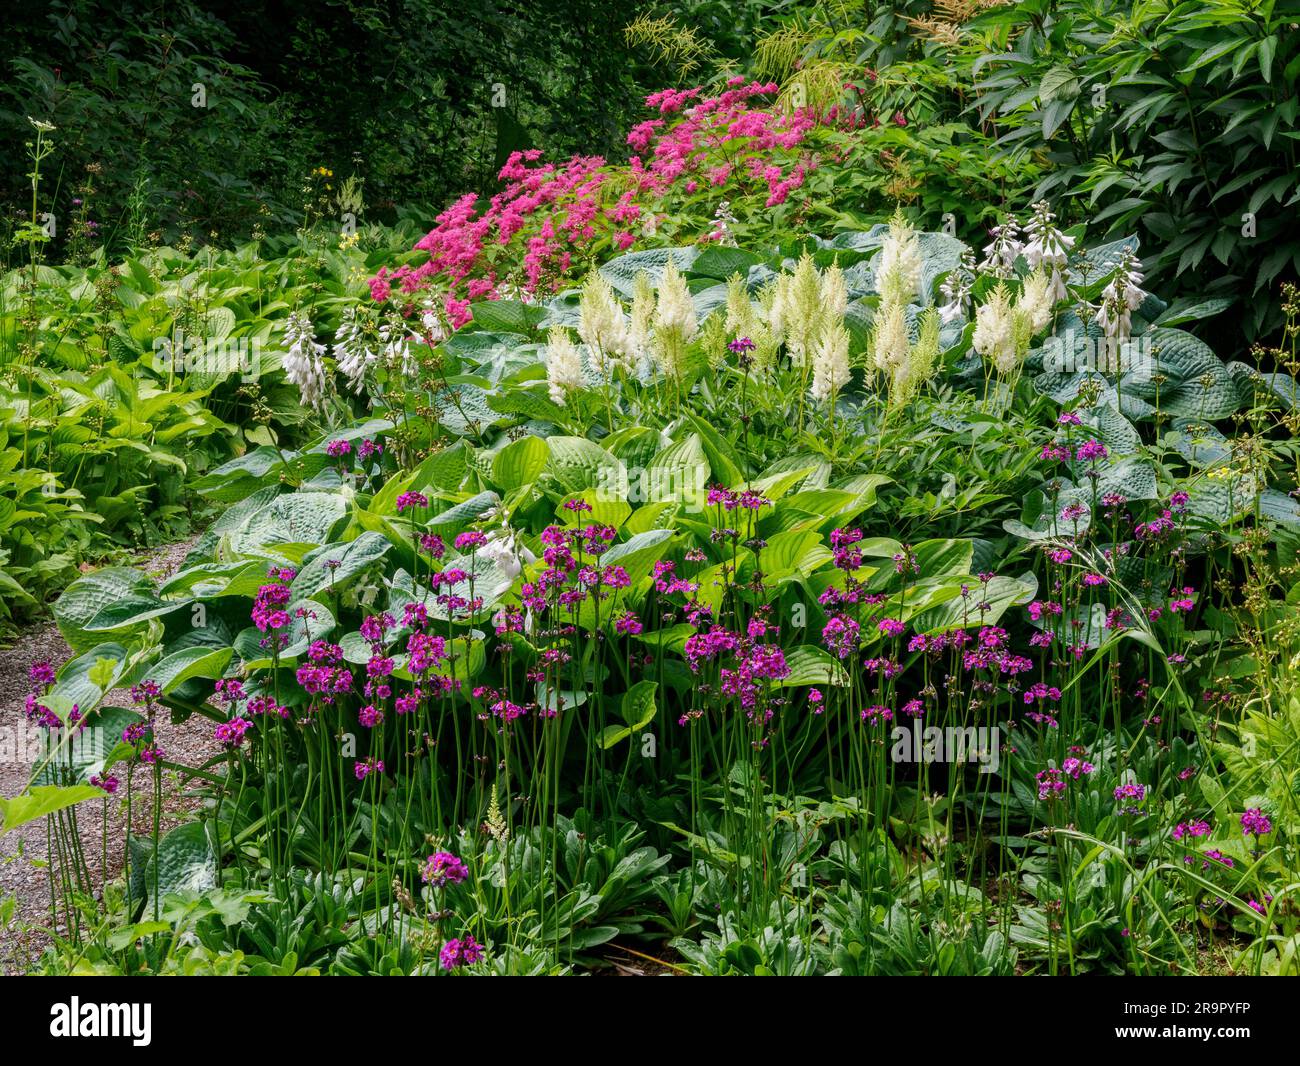 Damp woodland garden with mixed planting of purple Candelabra Primulas white Astilbe and red Filipendula at Aberglasney Gardens in South Wales UK Stock Photo